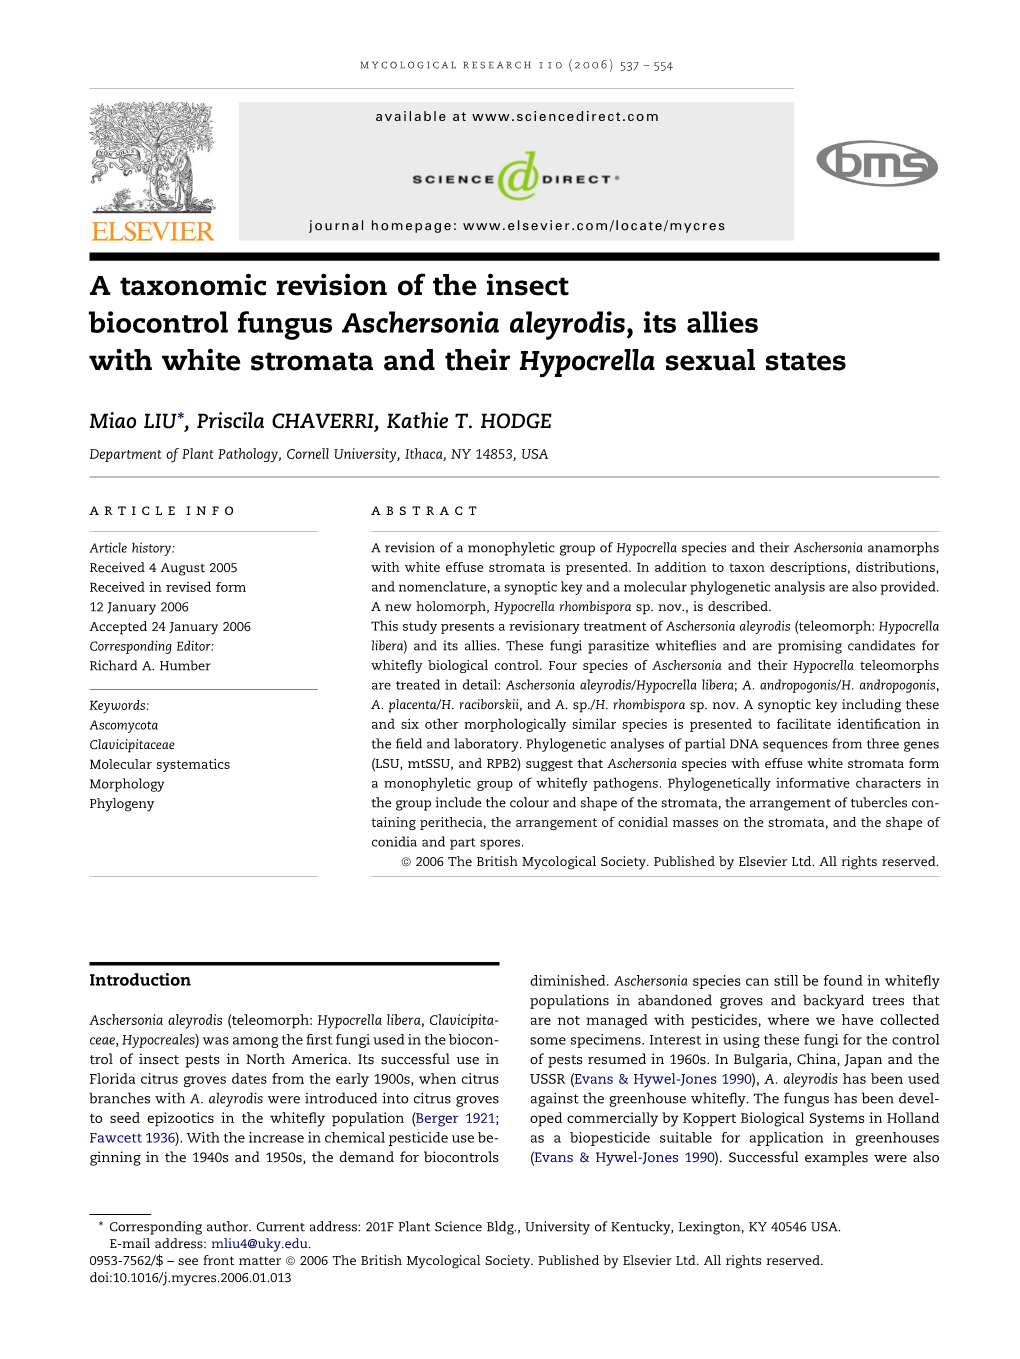 A Taxonomic Revision of the Insect Biocontrol Fungus Aschersonia Aleyrodis, Its Allies with White Stromata and Their Hypocrella Sexual States